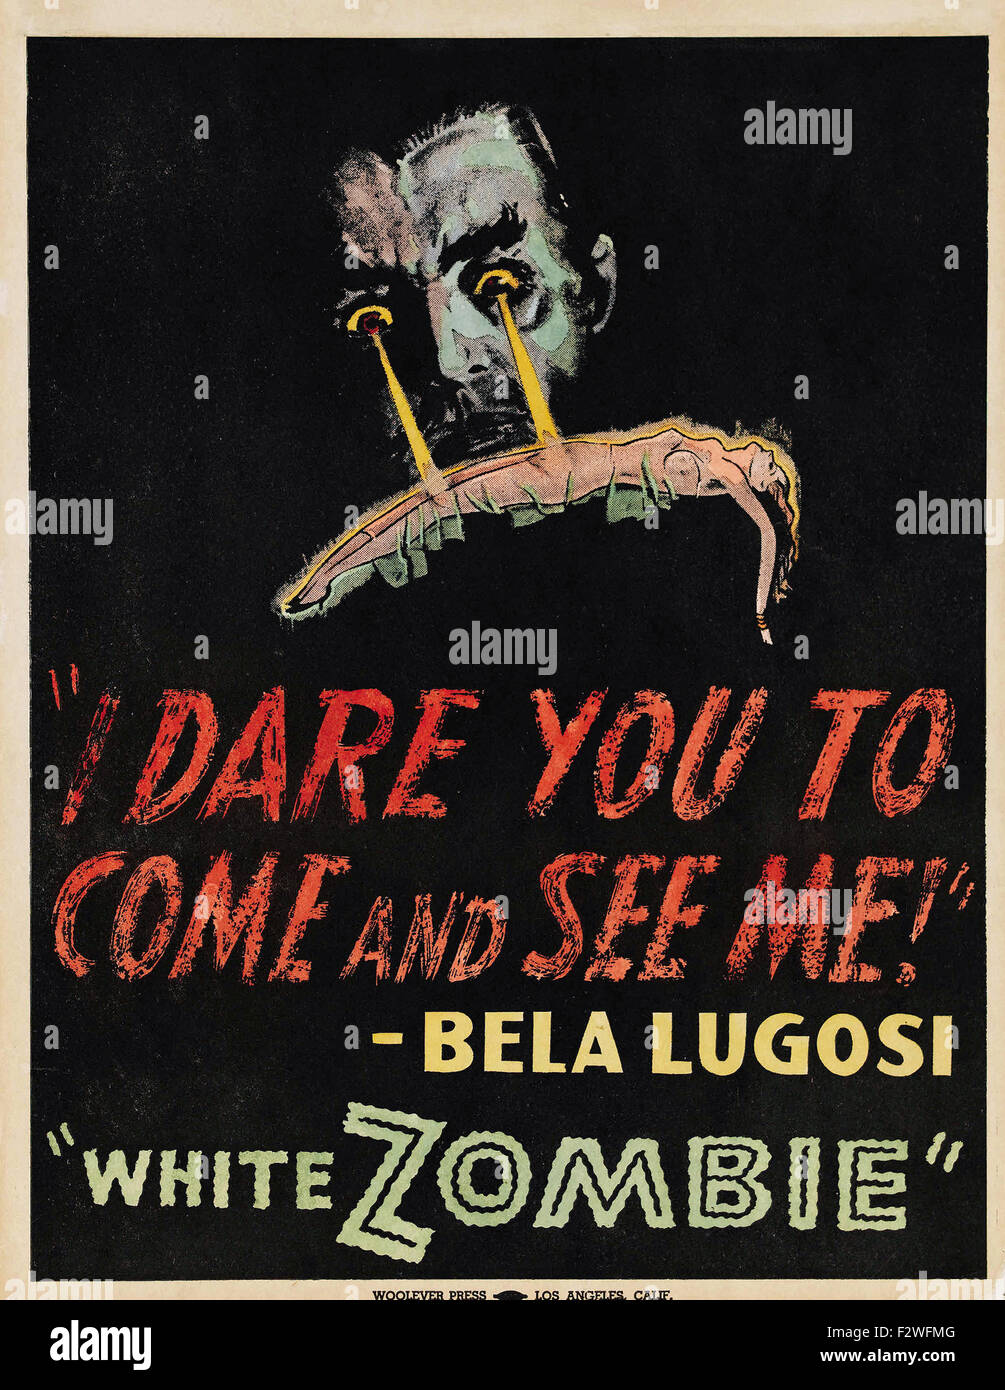 White Zombie - Movie Poster Banque D'Images